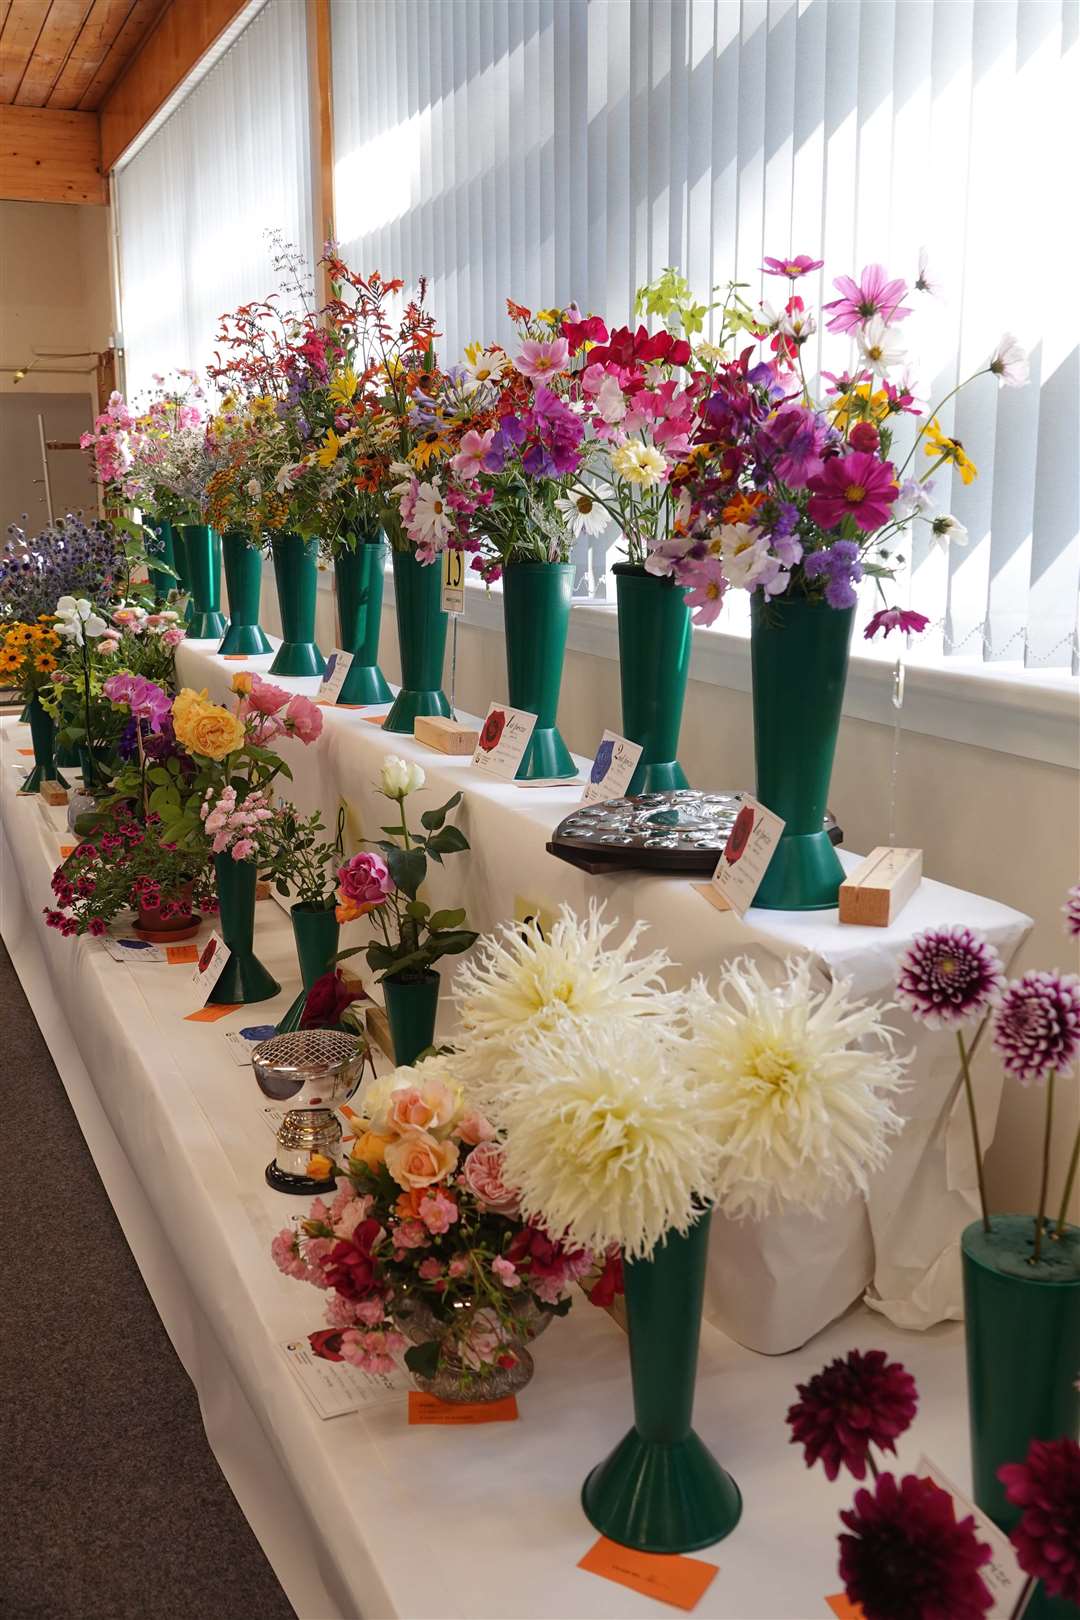 Alford Flower Show took place in the Men's Shed.